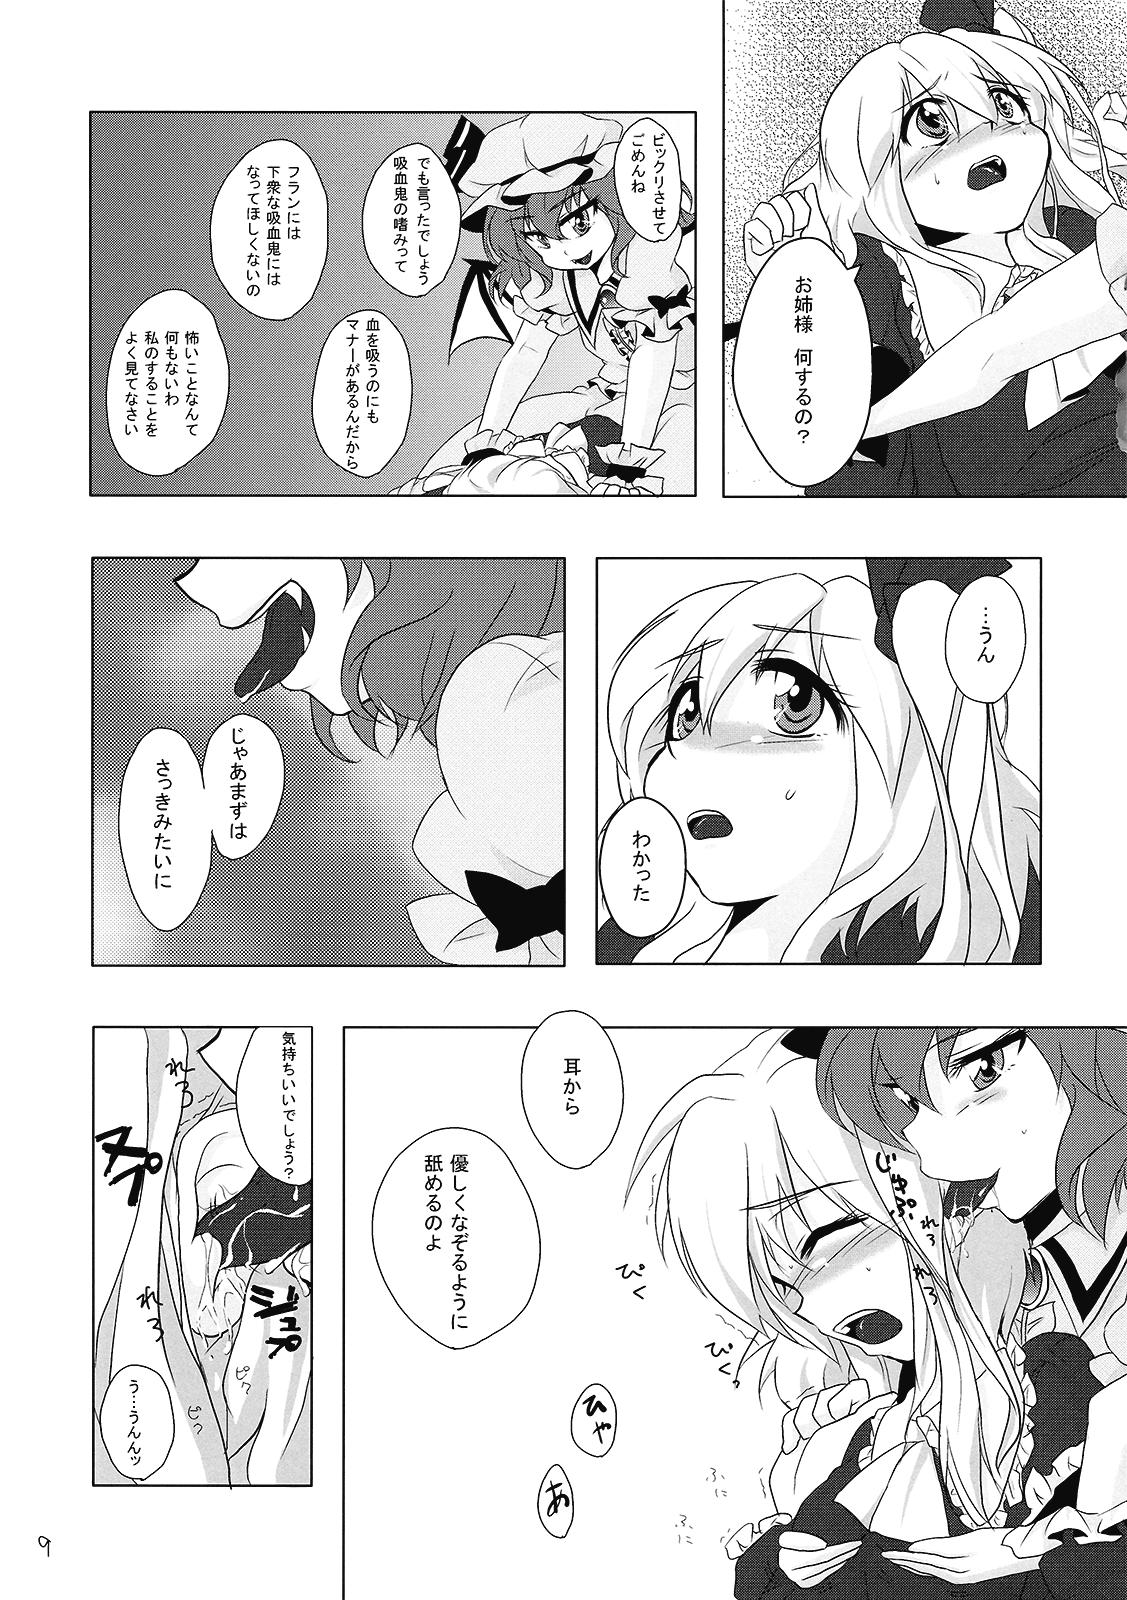 Sis 吸血鬼のすゝめ - Touhou project Dirty Talk - Page 11